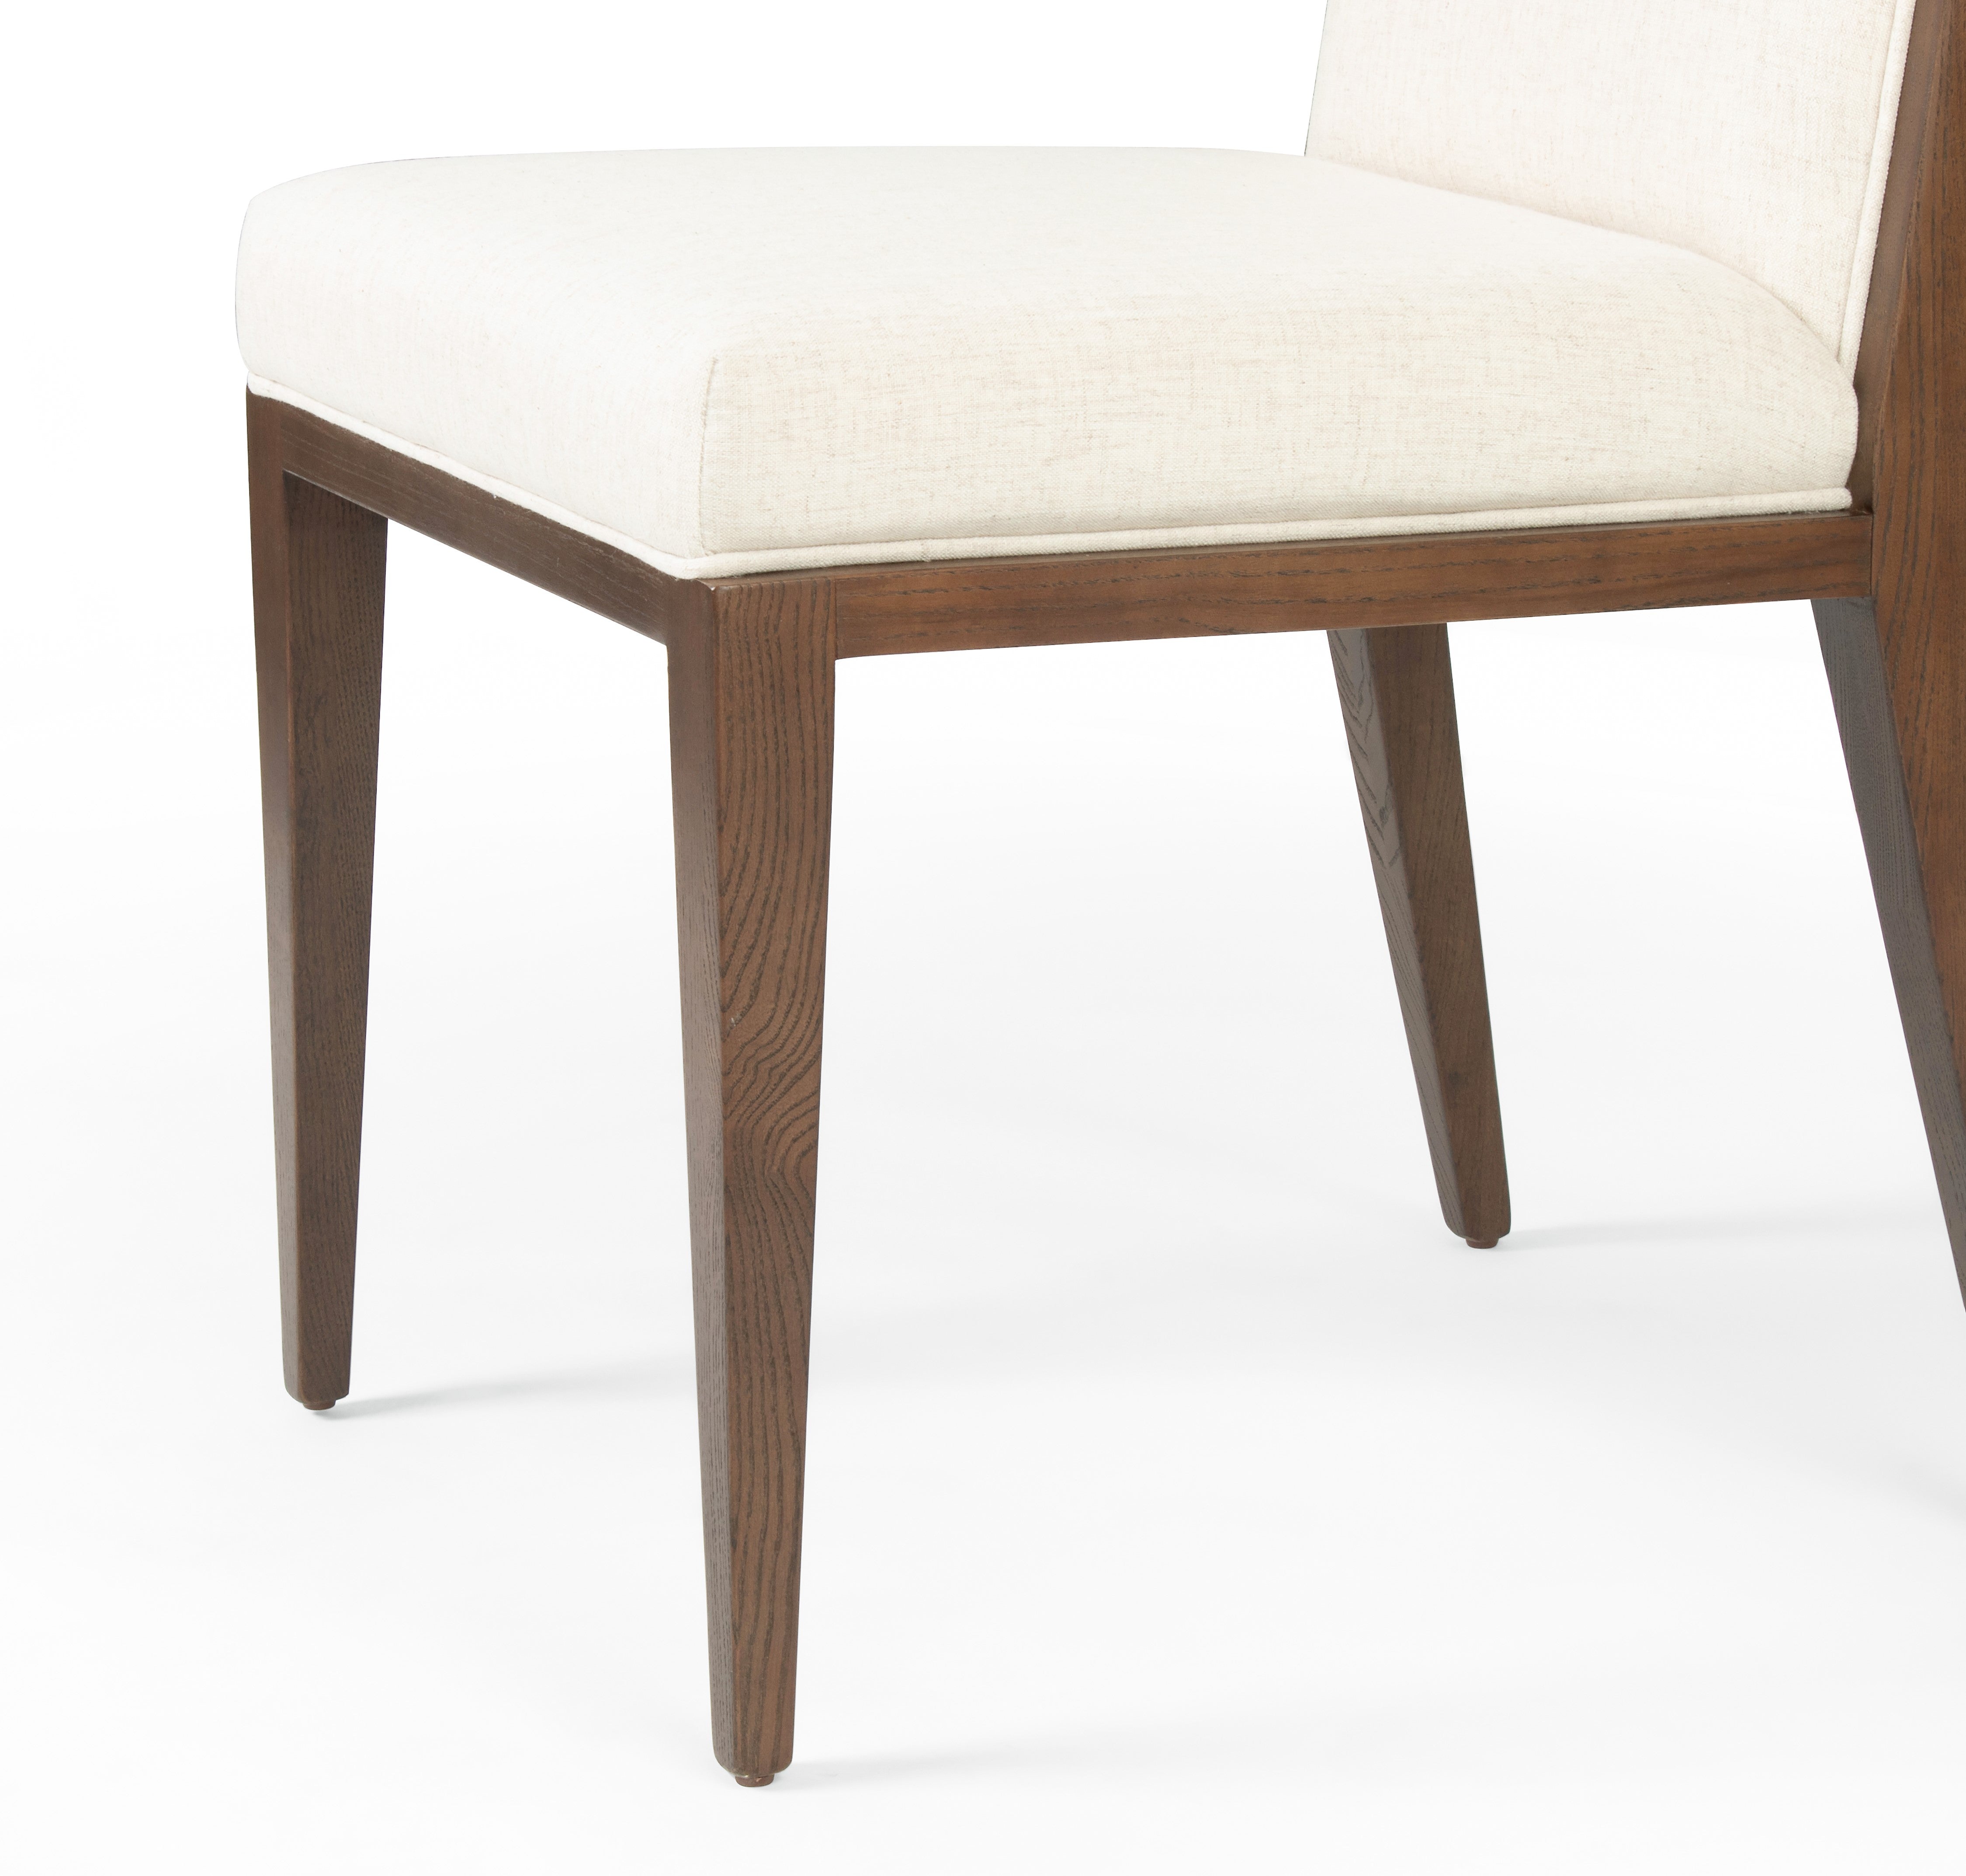 Lydia Dining Chair